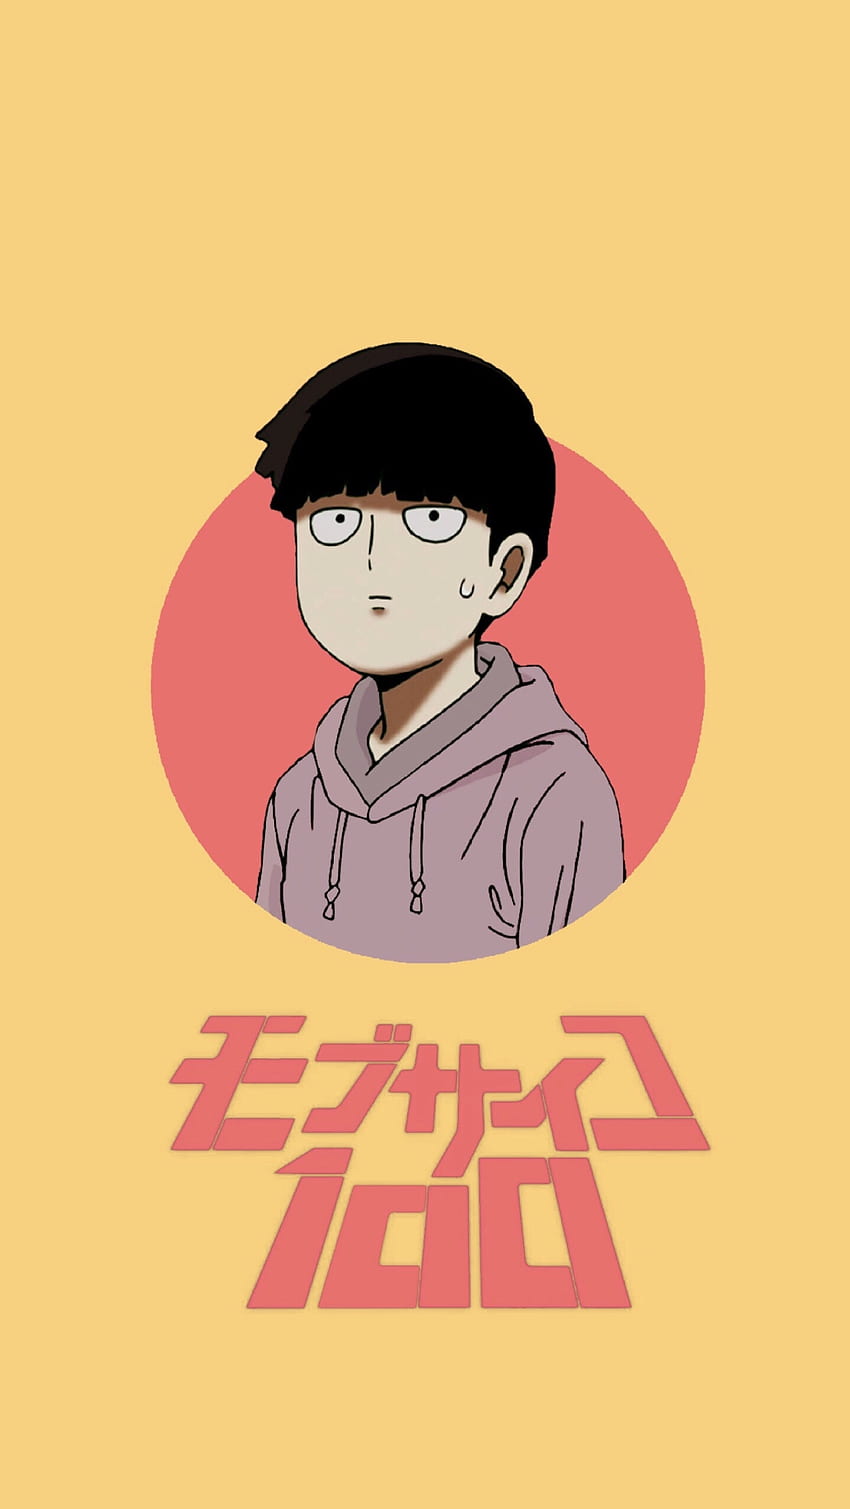 10 anime to watch if you like Mob Psycho 100